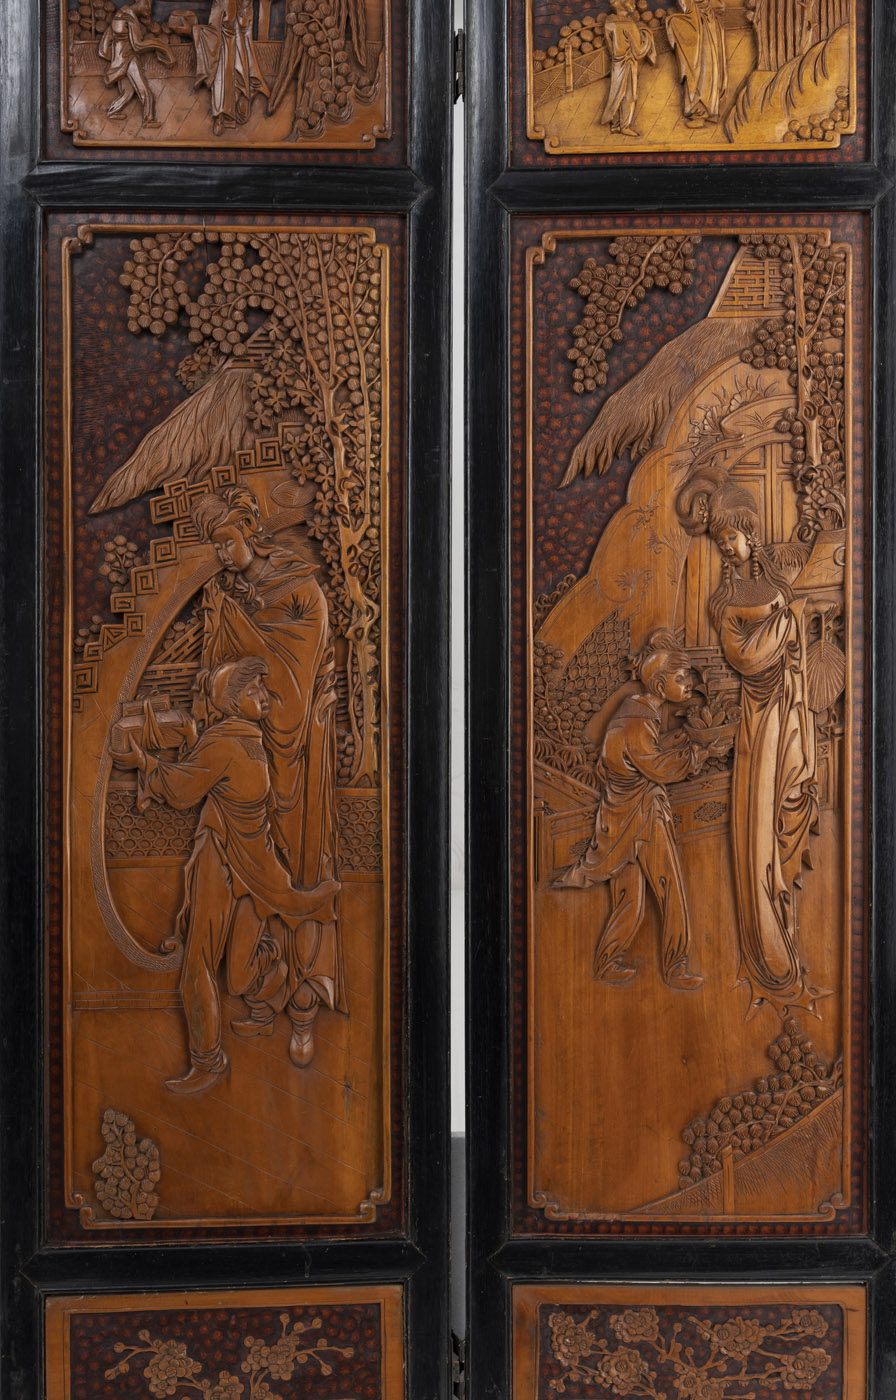 A RELIEF CARVED FIGURAL SCENES FOUR-PART SCREEN - Image 3 of 5